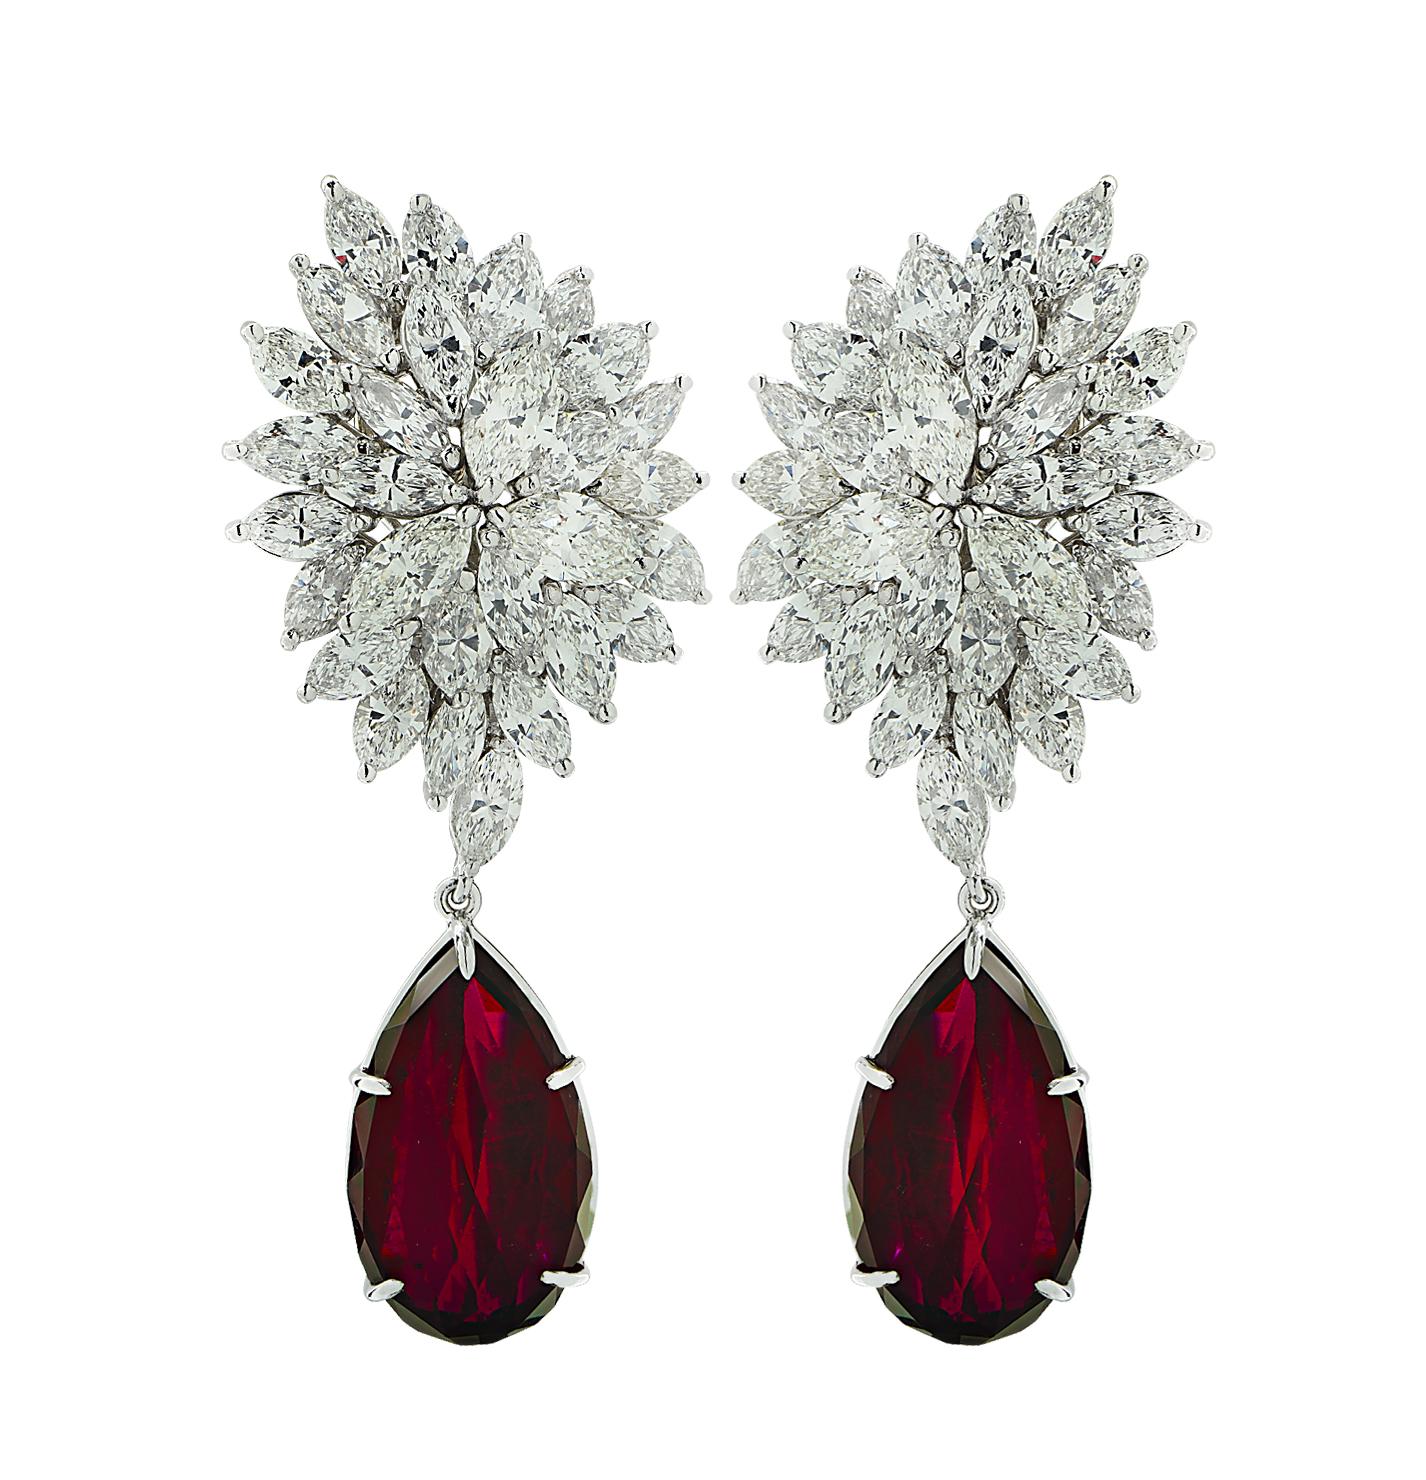 Sensational Vivid Diamonds dangle earrings crafted in 18 karat white gold, showcasing 2 exquisite pear cut, vivid crimson red tourmaline stones, accented by 56 marquise cut diamonds weighing 12.70 carats total, F-J color, VS clarity. They measure 2